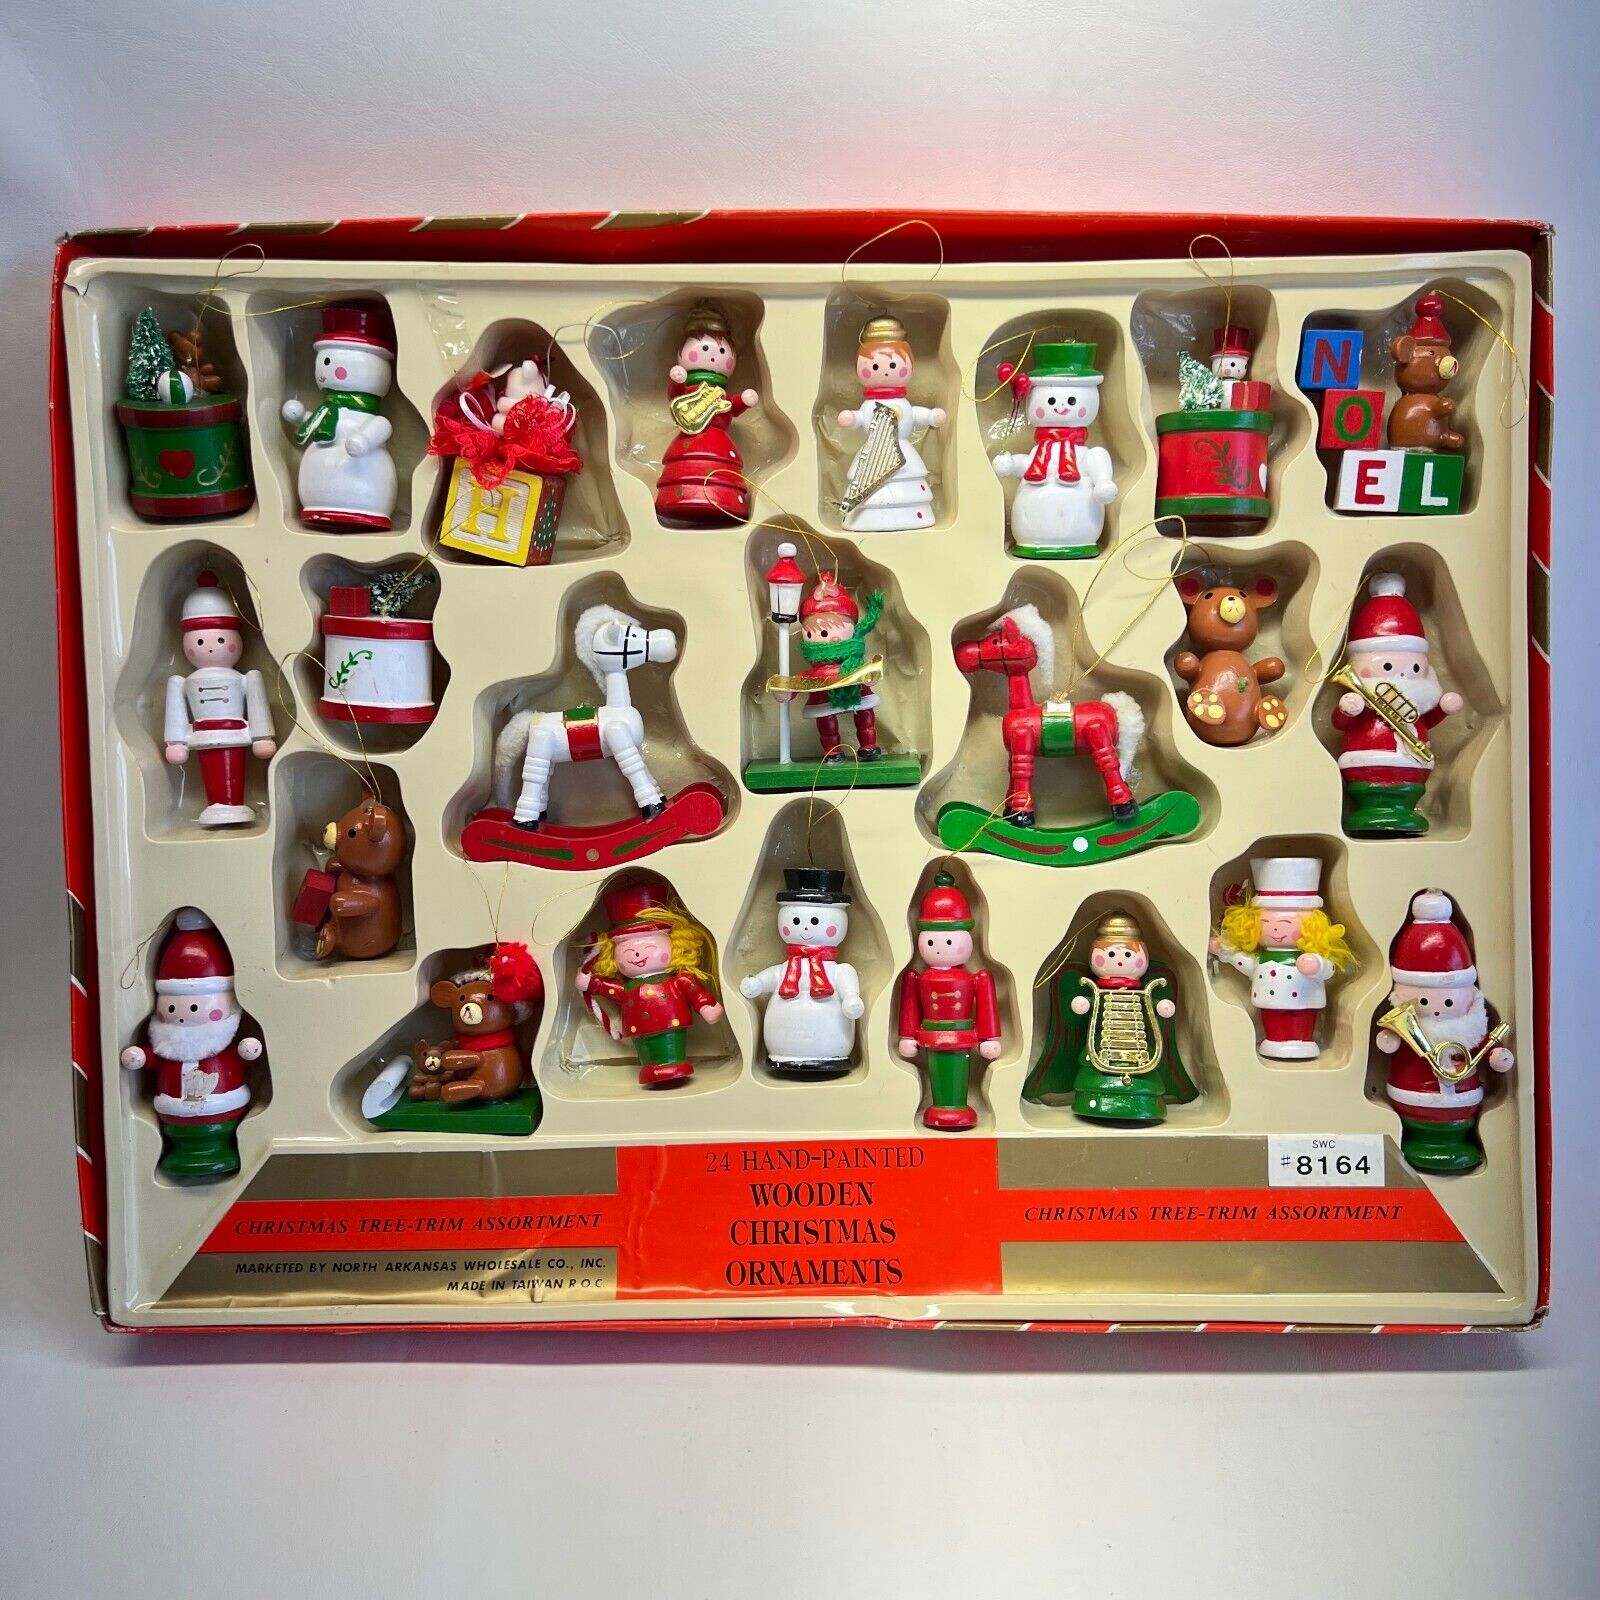 Vintage Wooden Christmas Ornaments Hand Painted Set of 24